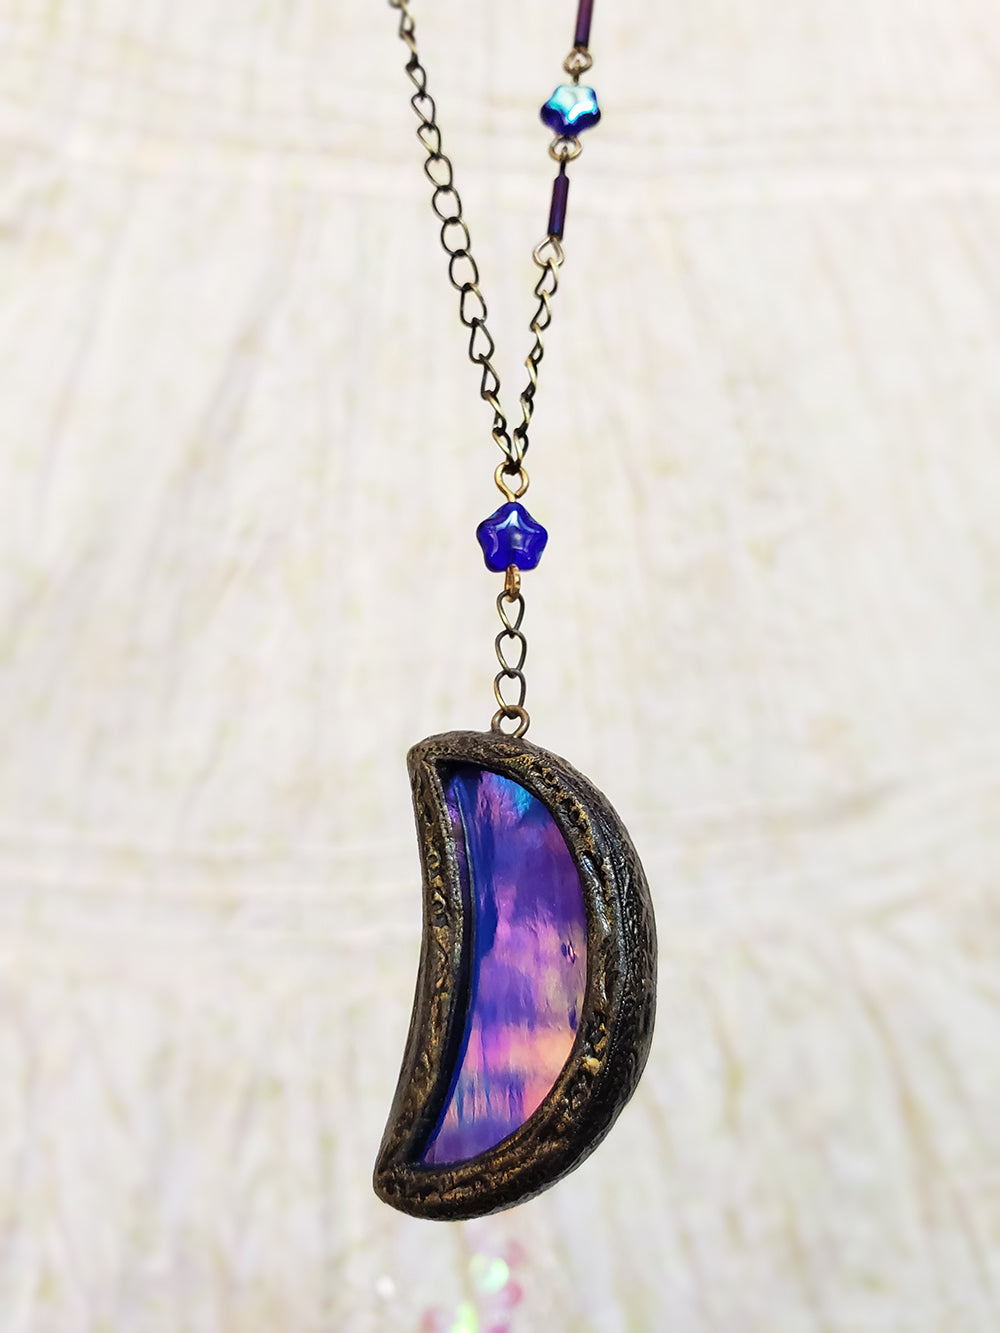 caelestis ignis ~ Iridescent Stained Glass Amulet